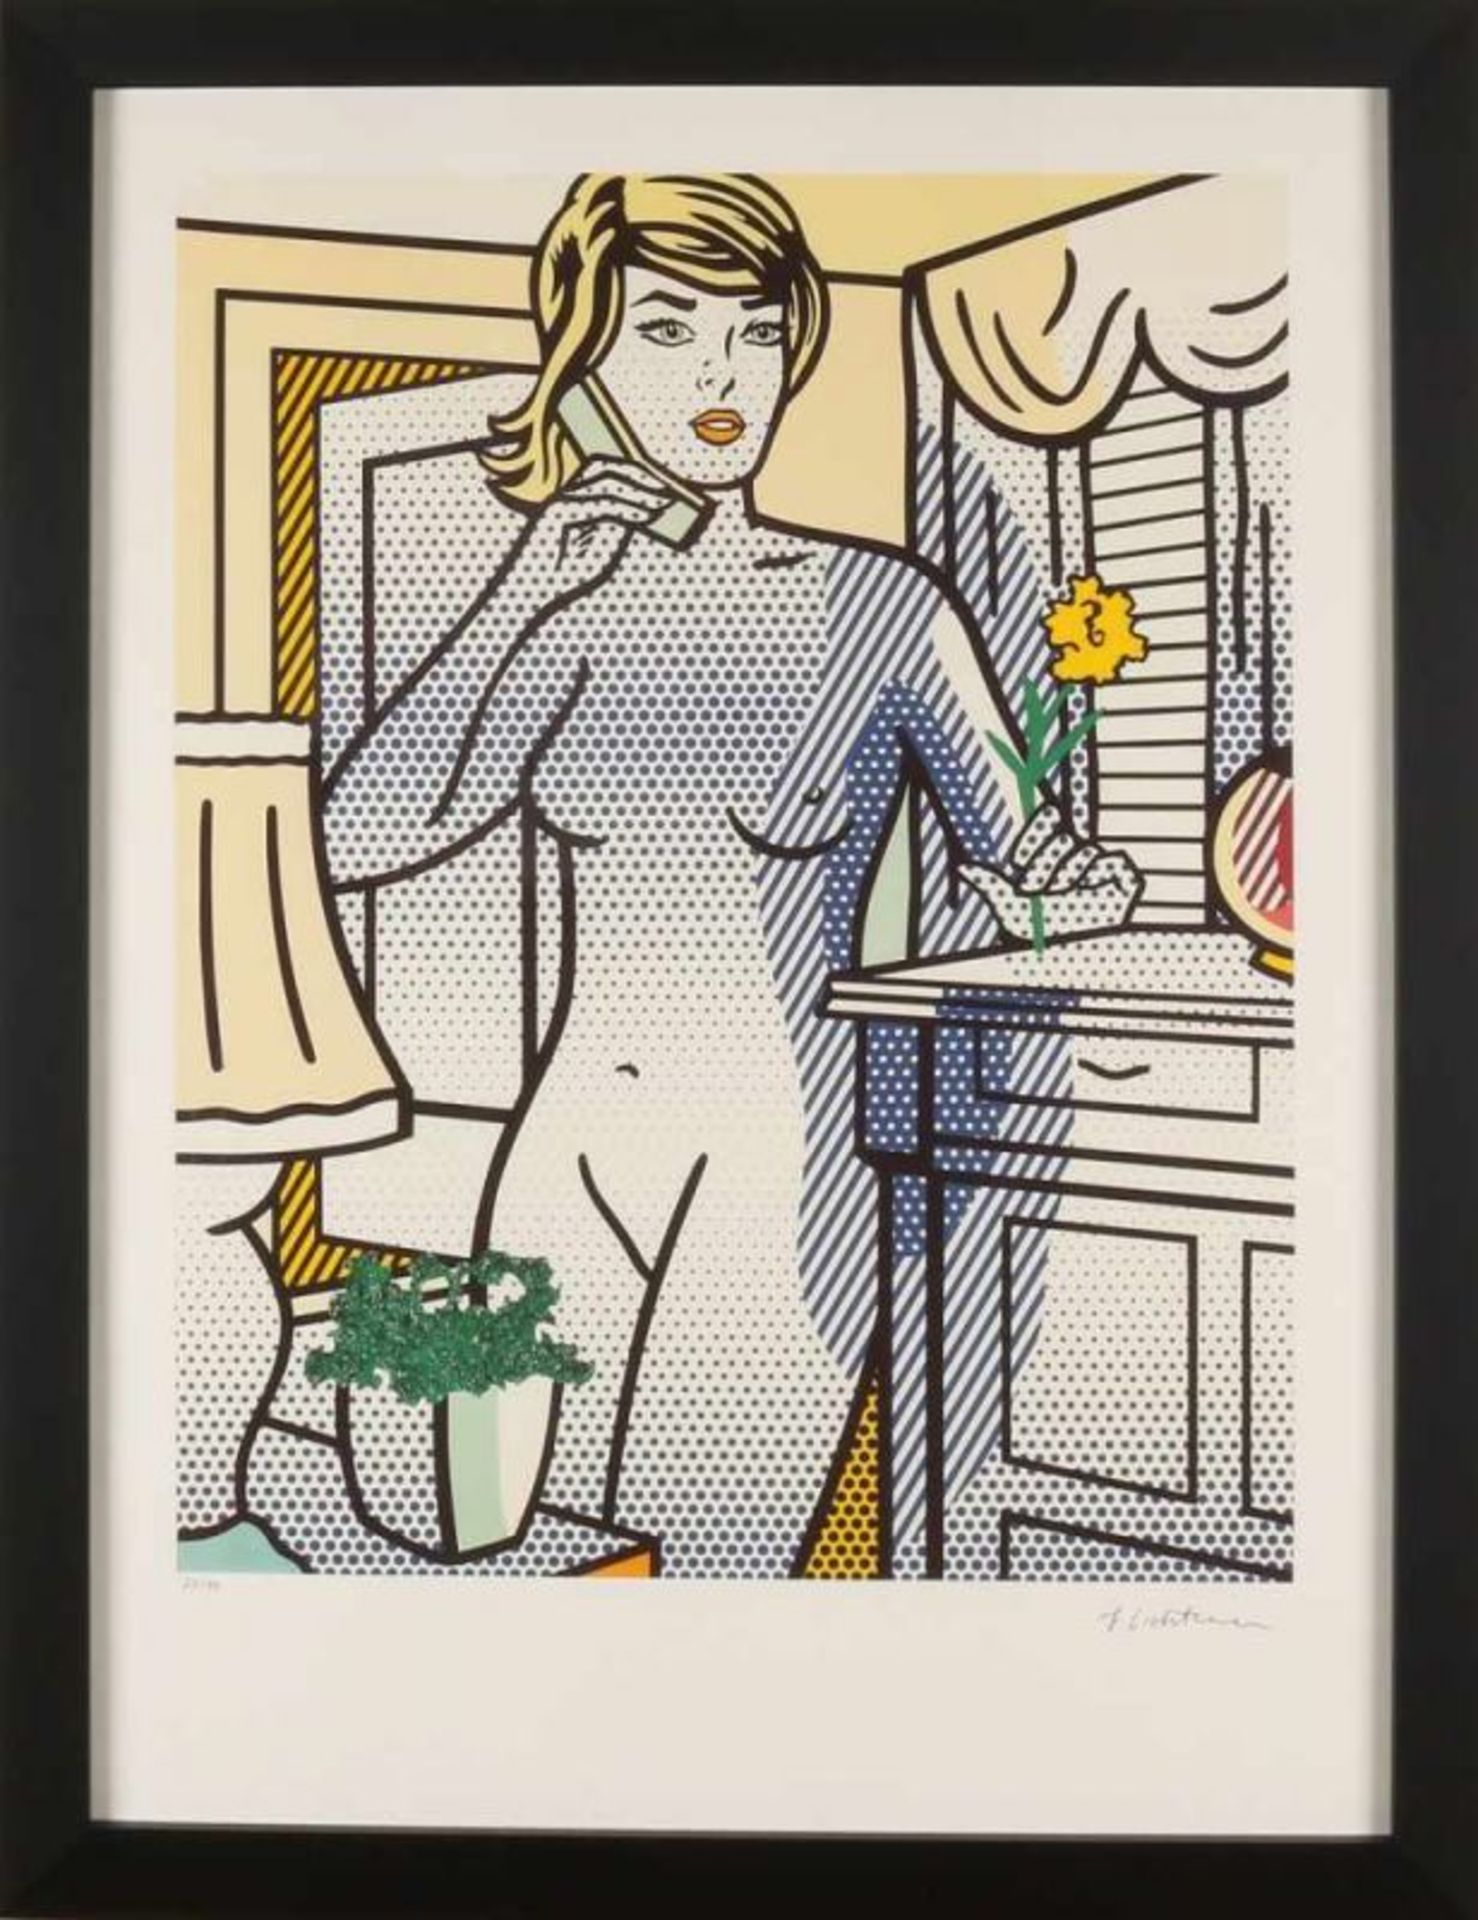 Lichtenstein. Nr. 79/199. Second half 20th century. Naked woman in interior. Lithograph on paper.